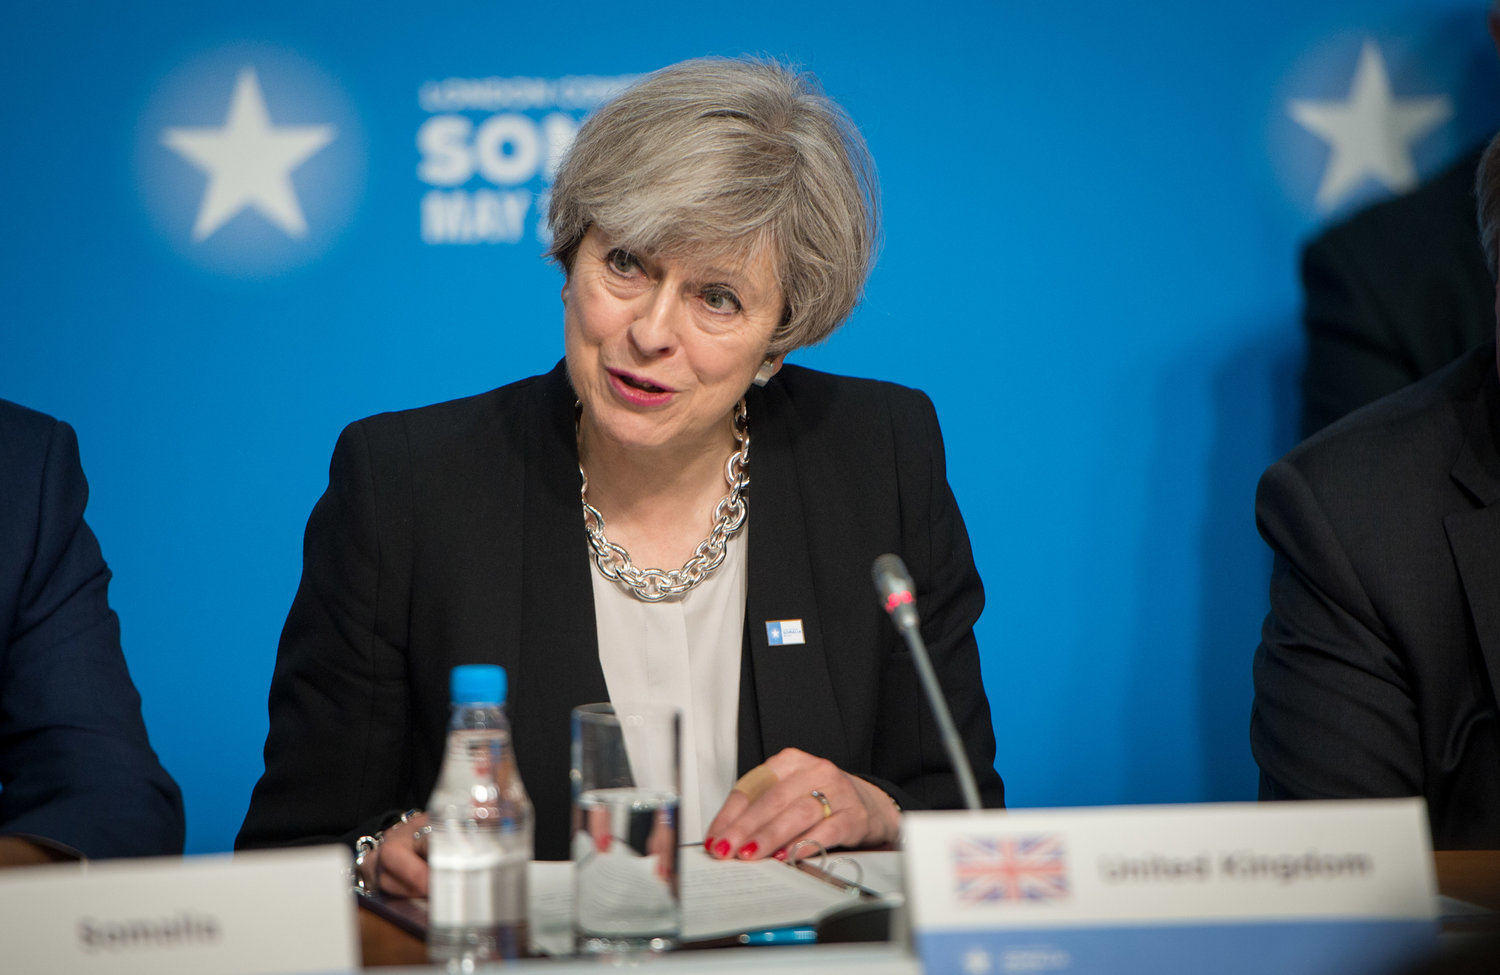 Atalanta in Politico: "Theresa May faces more gender-based abuse than Jeremy Corbyn: report"